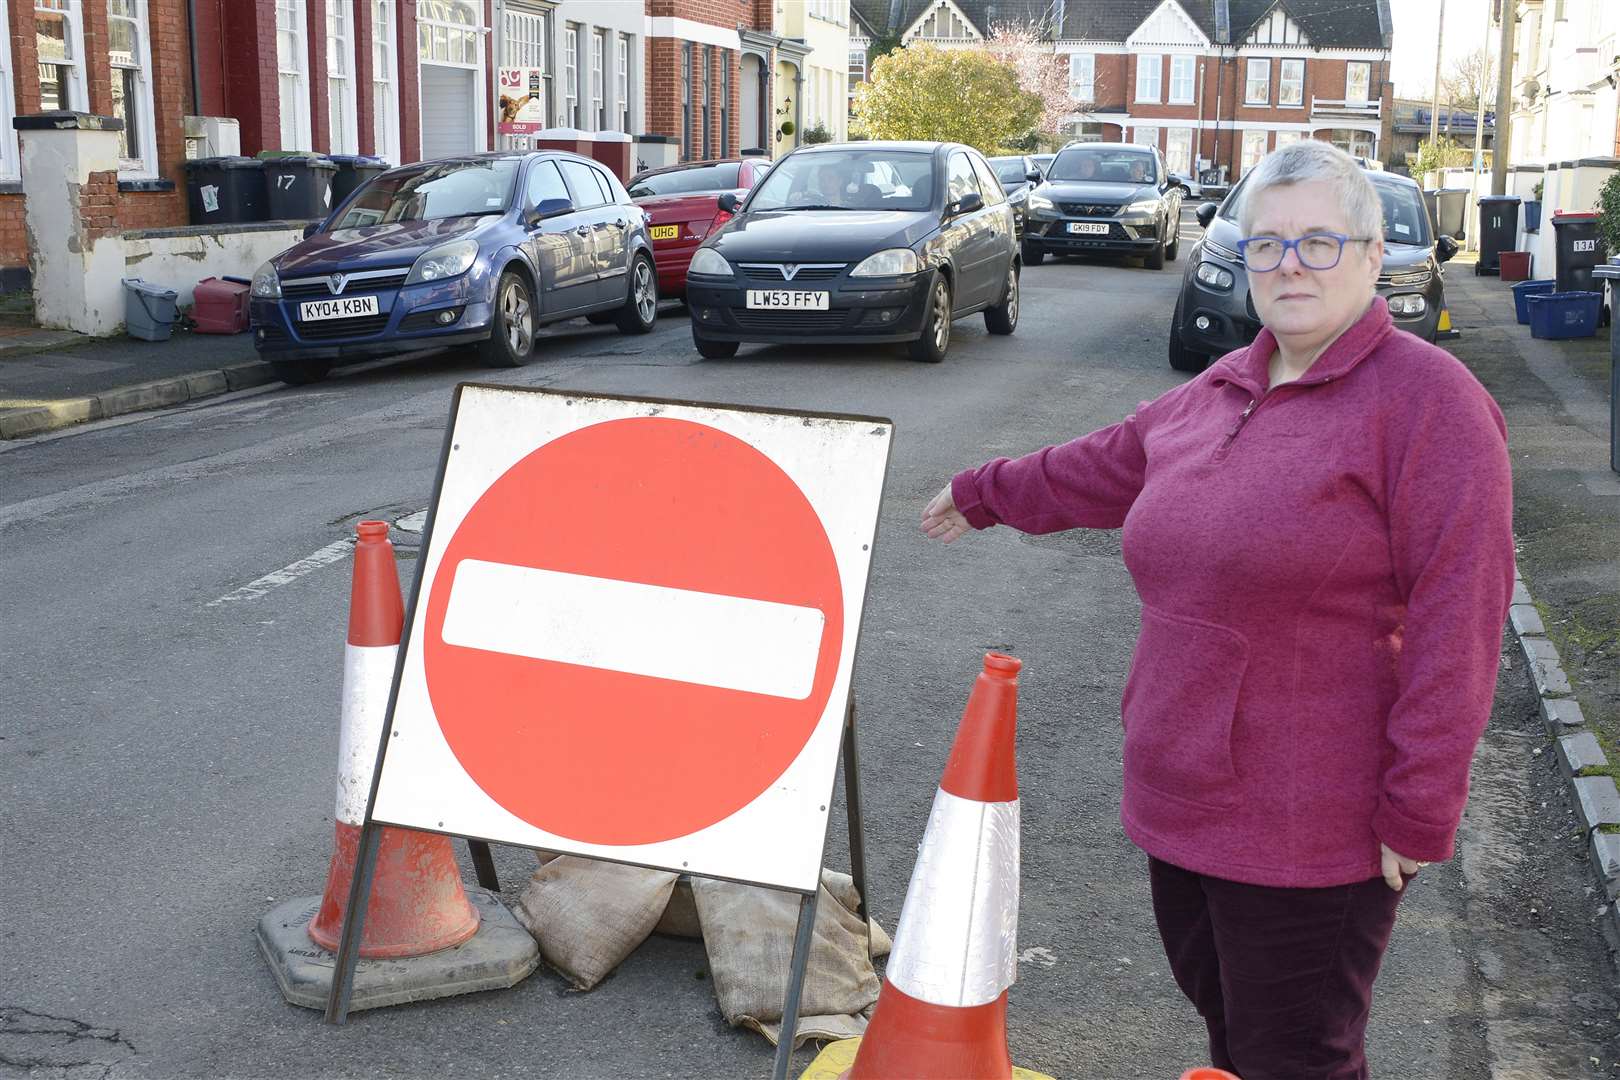 Gosfield road resident Debbie Foreman is calling for drivers caught ignoring the one-way signs to be fined